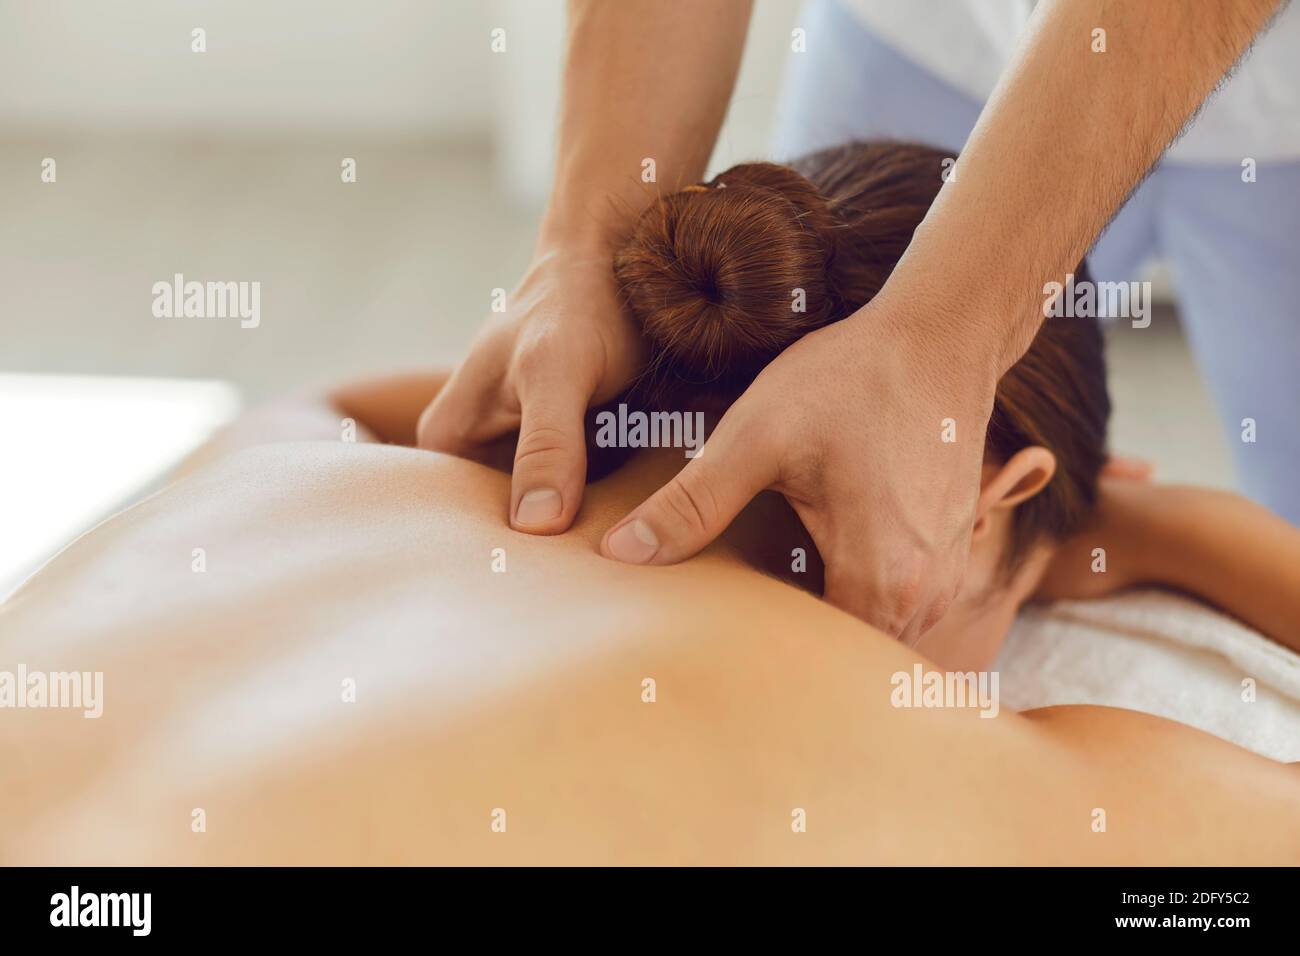 Young woman enjoying relaxing remedial body massage done by professional masseur Stock Photo